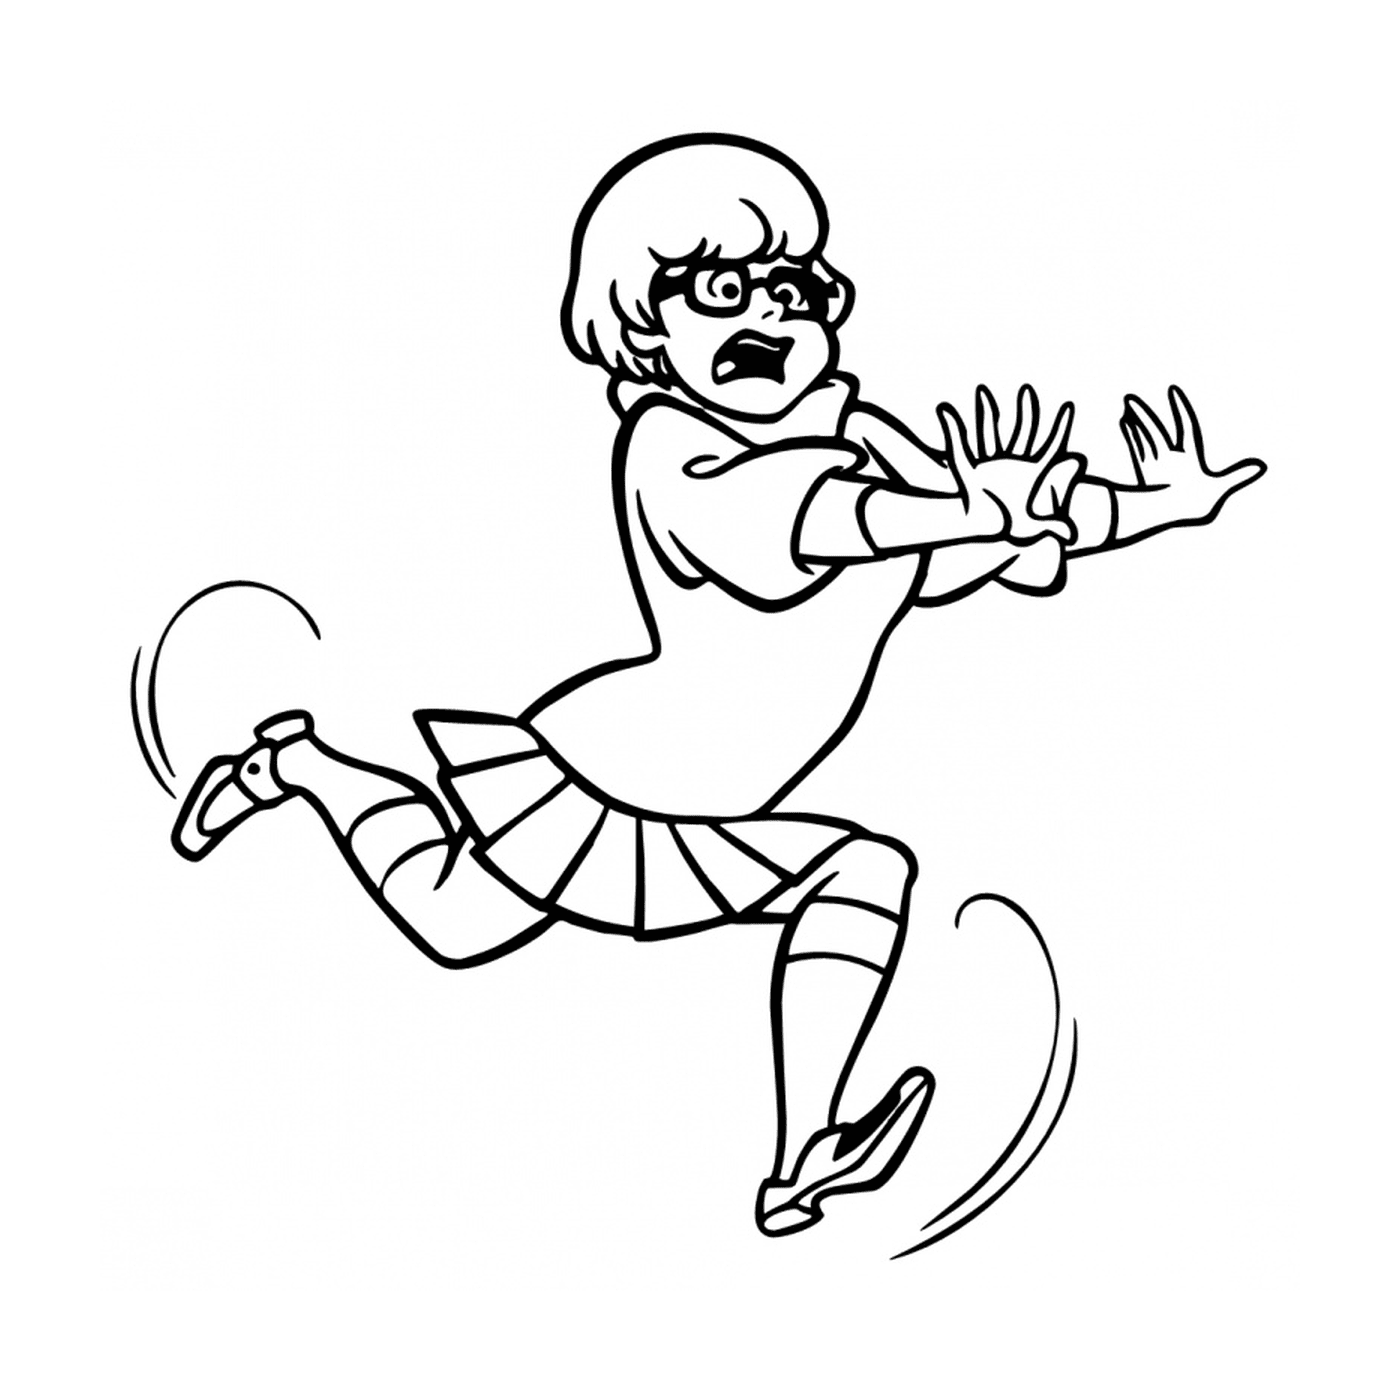  A drawn girl running in the air 